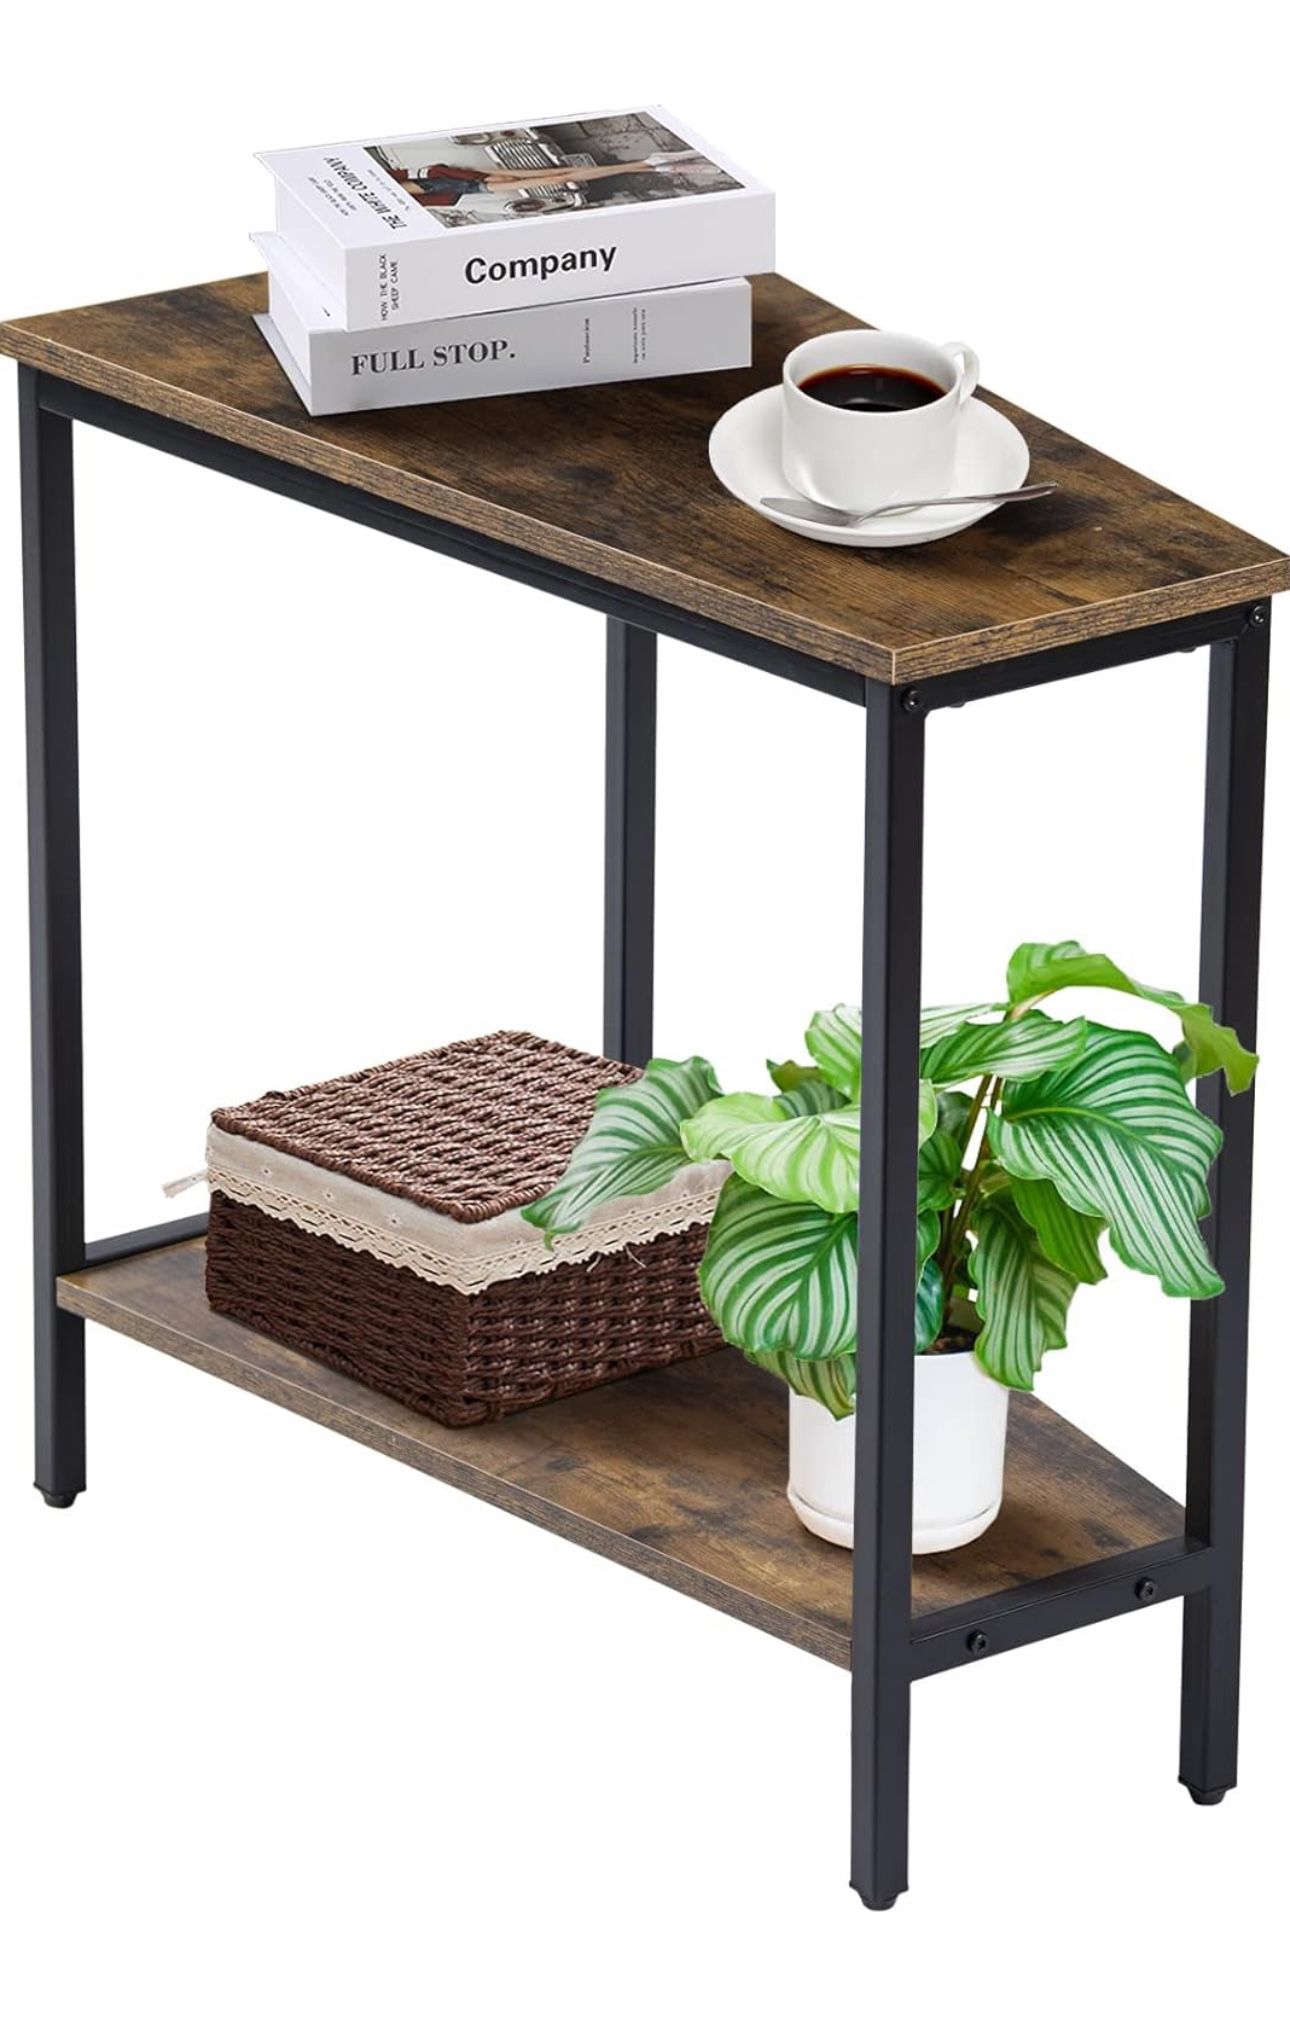 Wedge End Table - Narrow Triangle End Table - Recliner Table with Storage - Corner Tables for Living Room - Chair Side Tables for Small Spaces - Recta